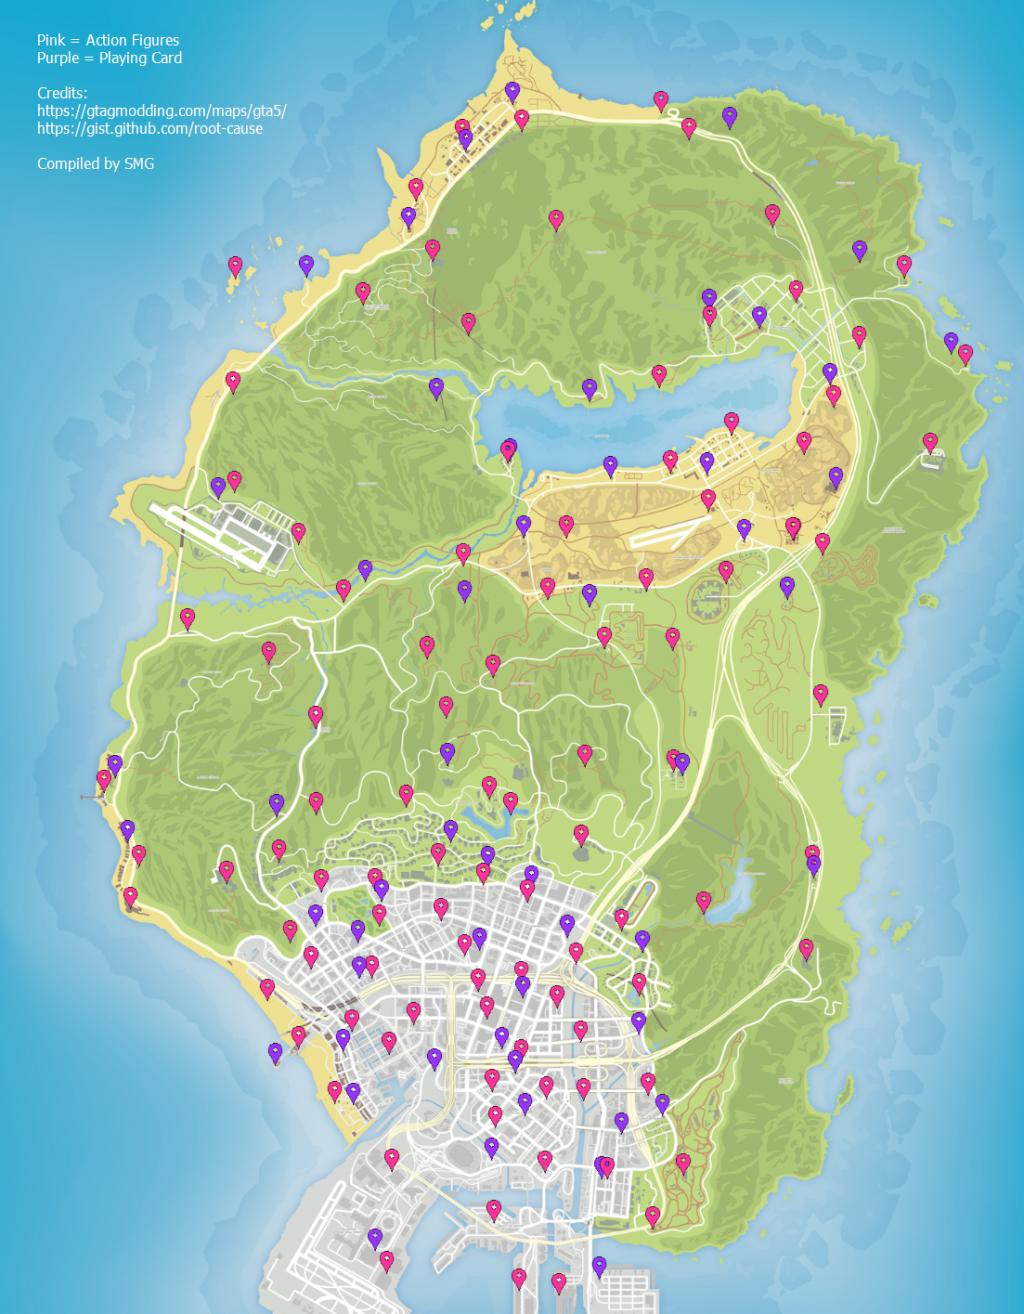 GTA V: Know the map and where to pick up collectables - 2020